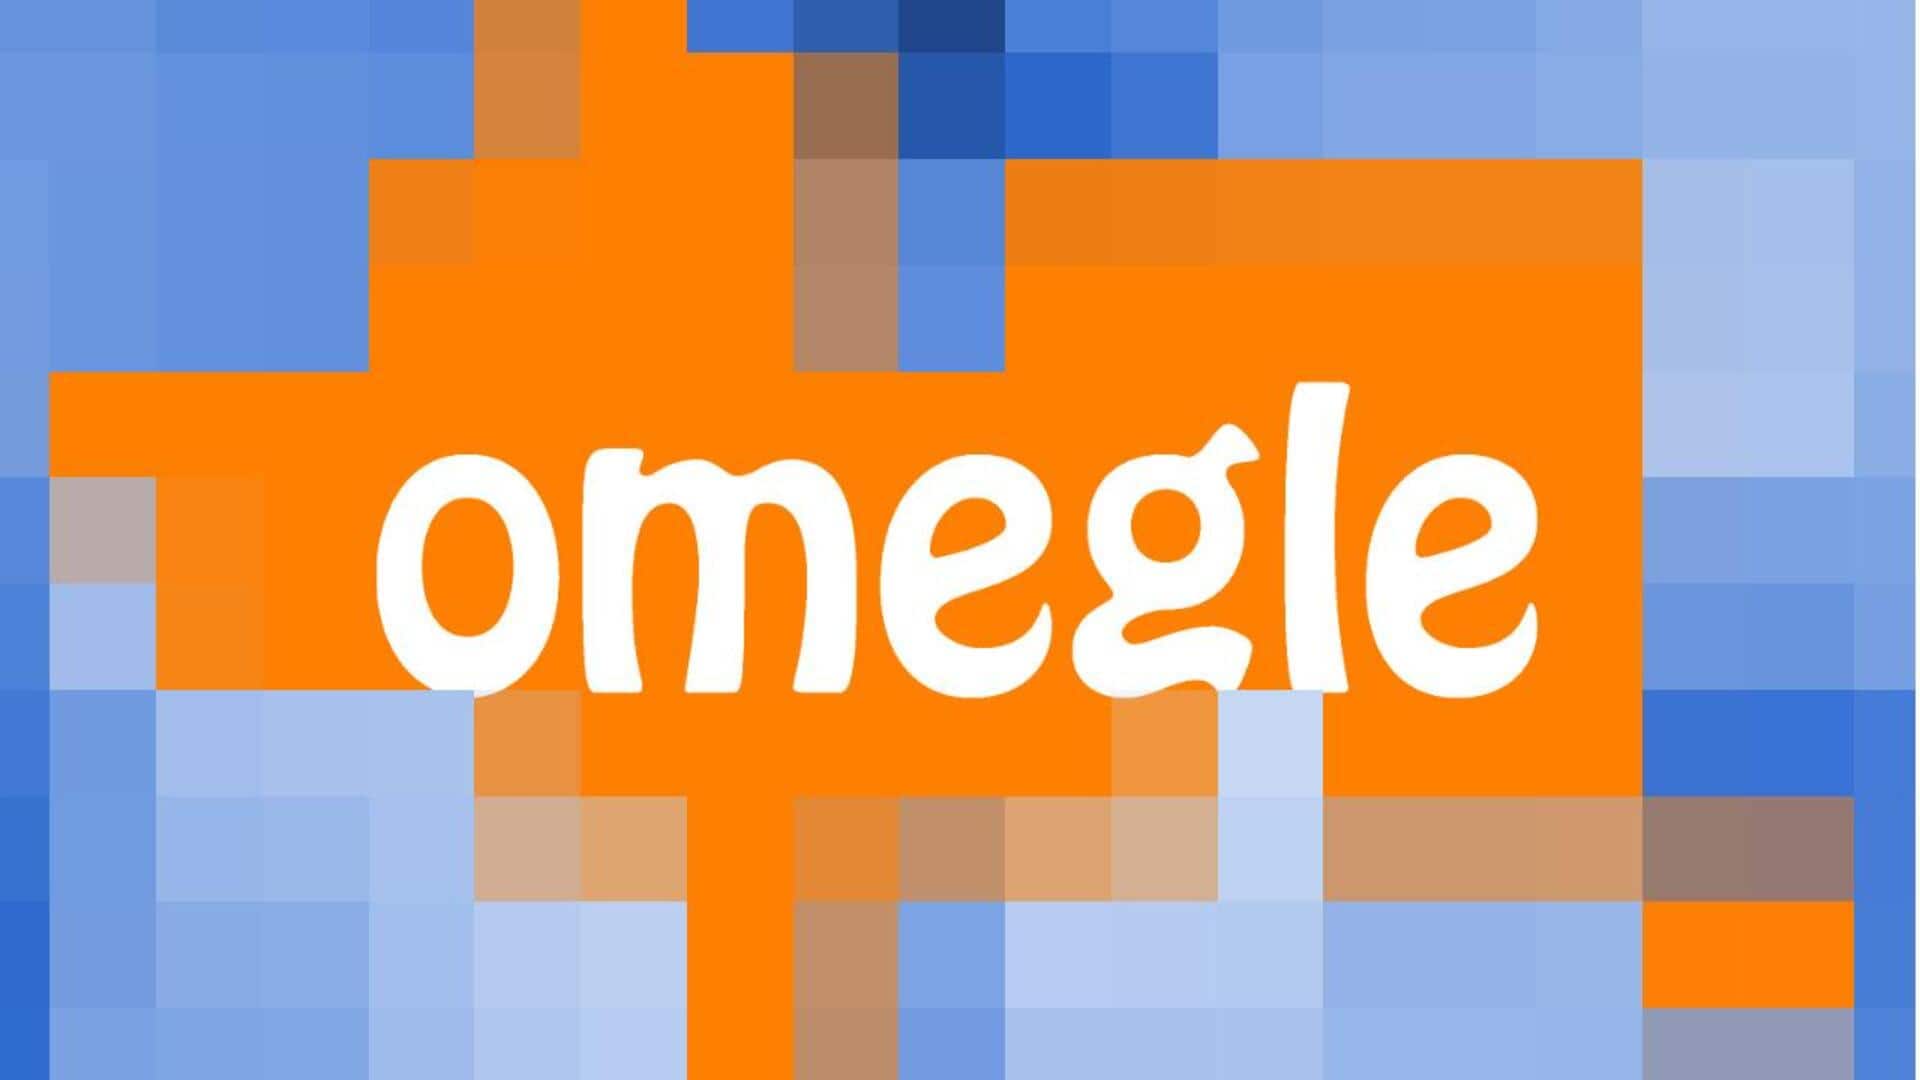 Online chat website Omegle shuts down after 14 years